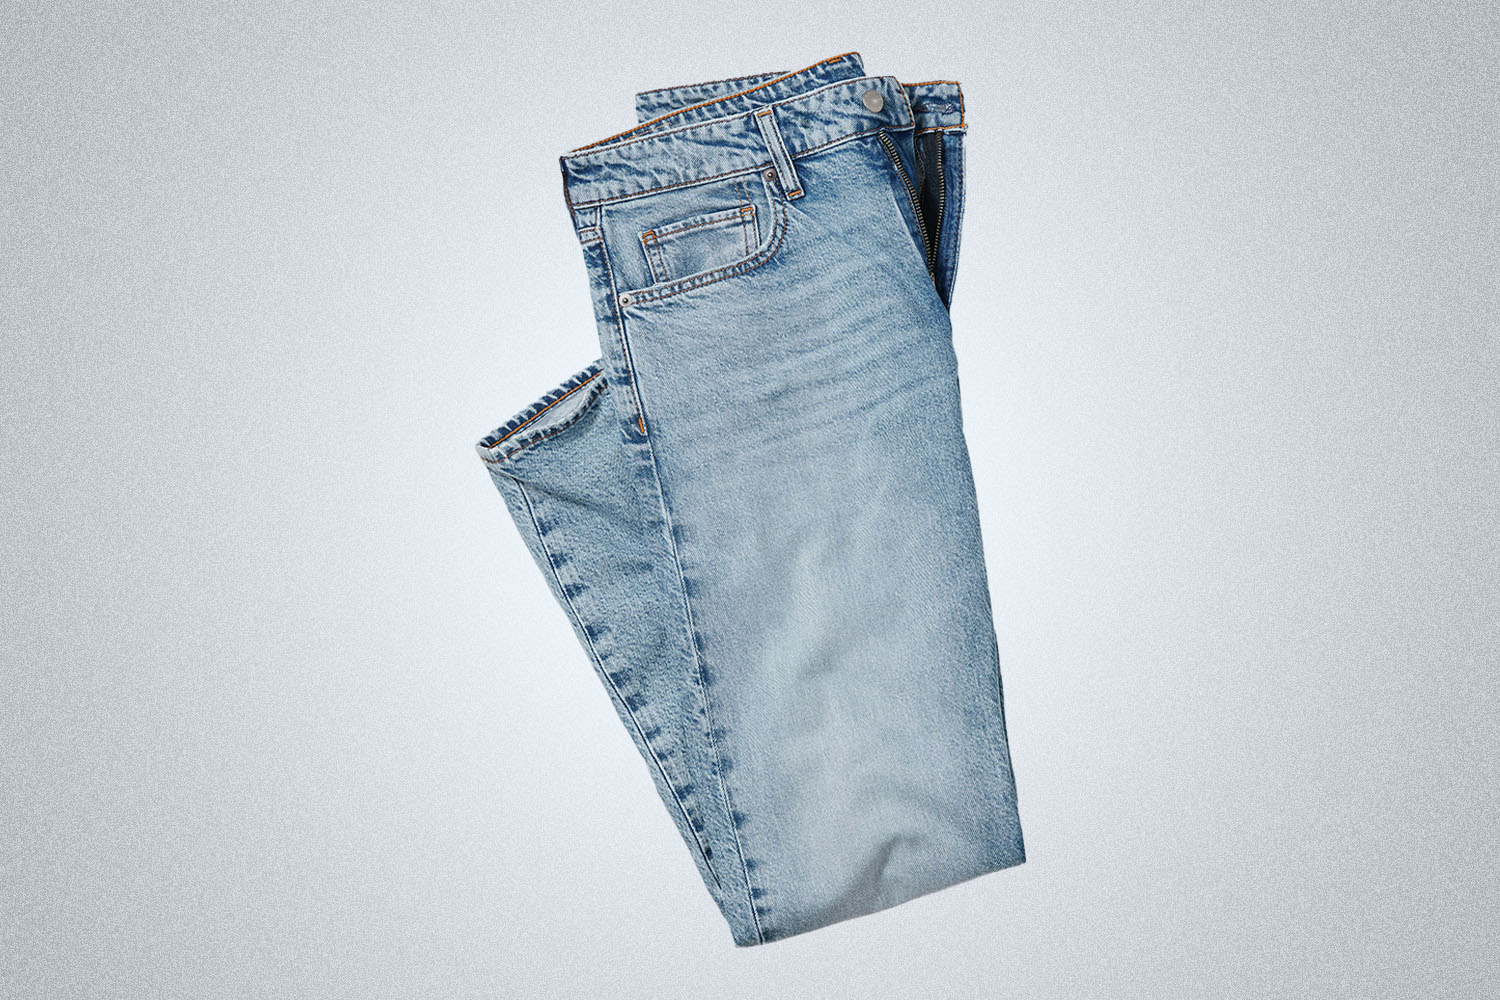 a pair of light washed folded jeans from Bonobos on a grey background